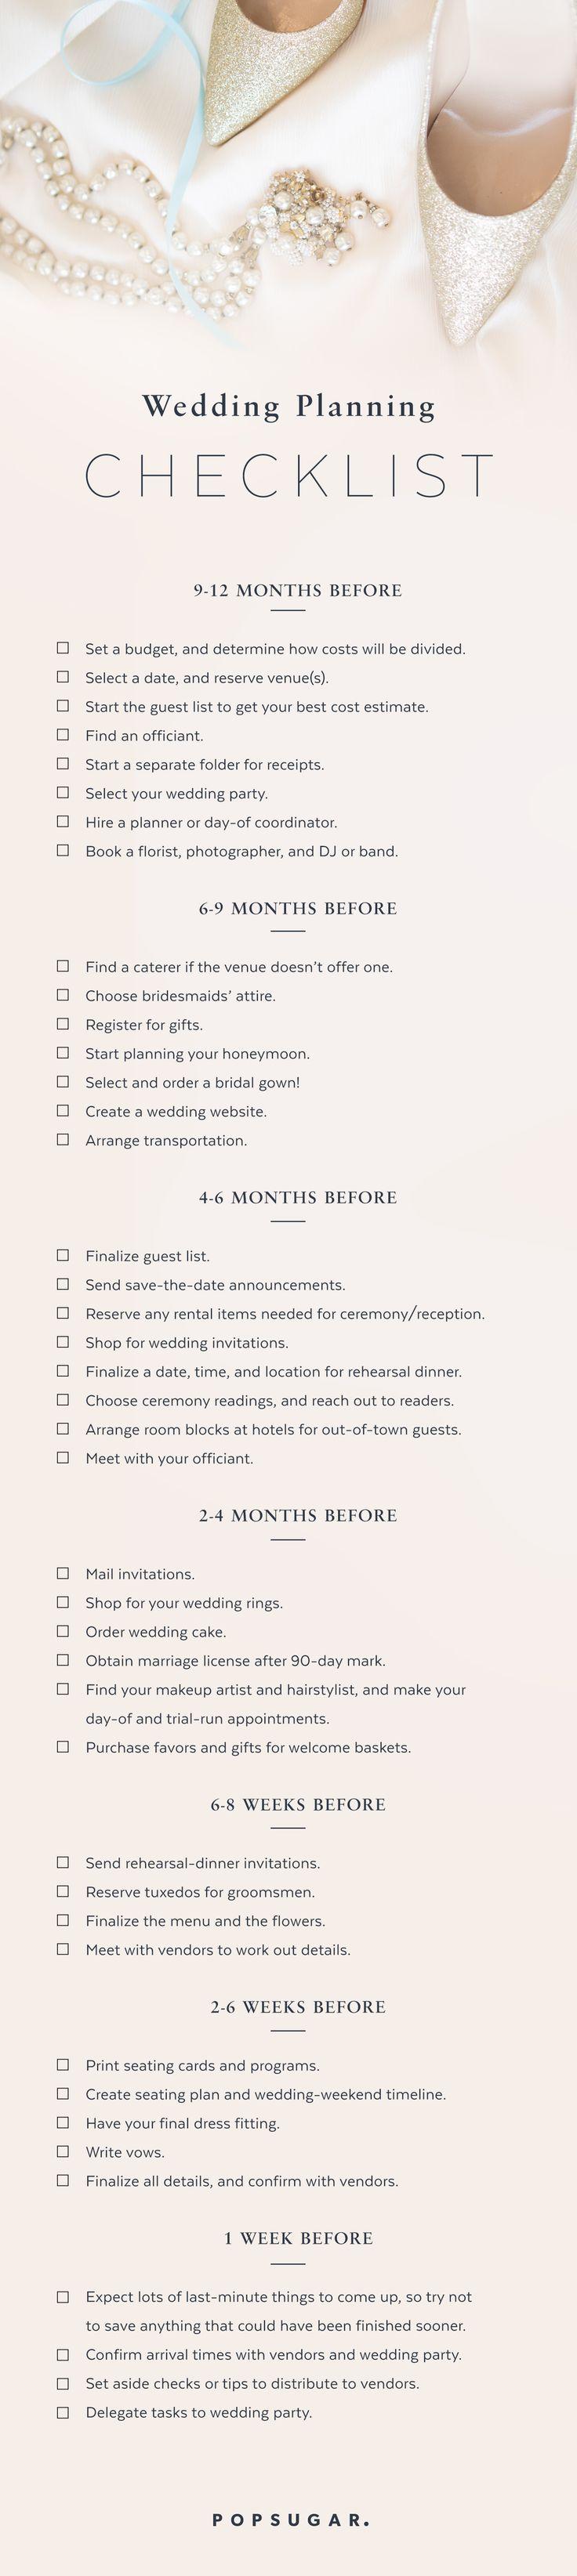 Mariage - Download The Ultimate Wedding Planning Checklist!